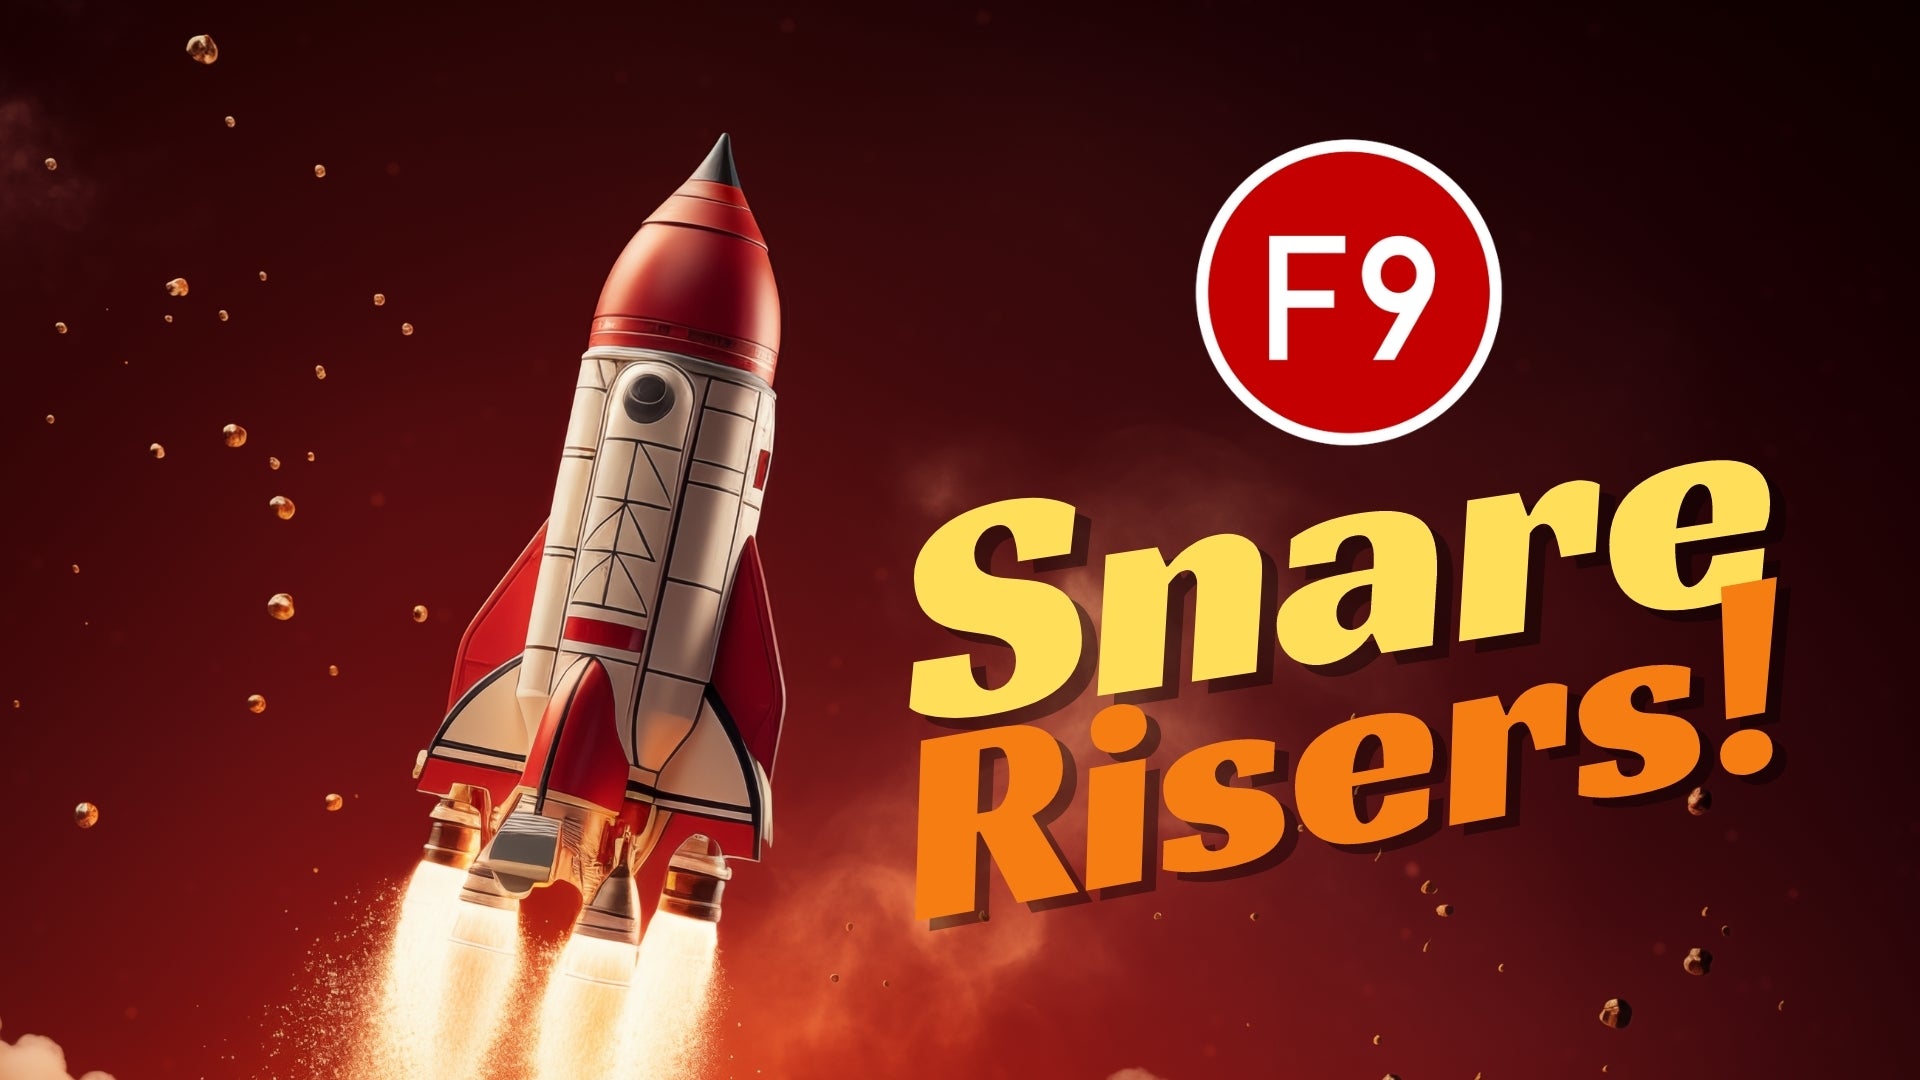 F9 SNARE Risers - Create a Powerful Breakdown, Build-Up & Drop with F9 SNARE!